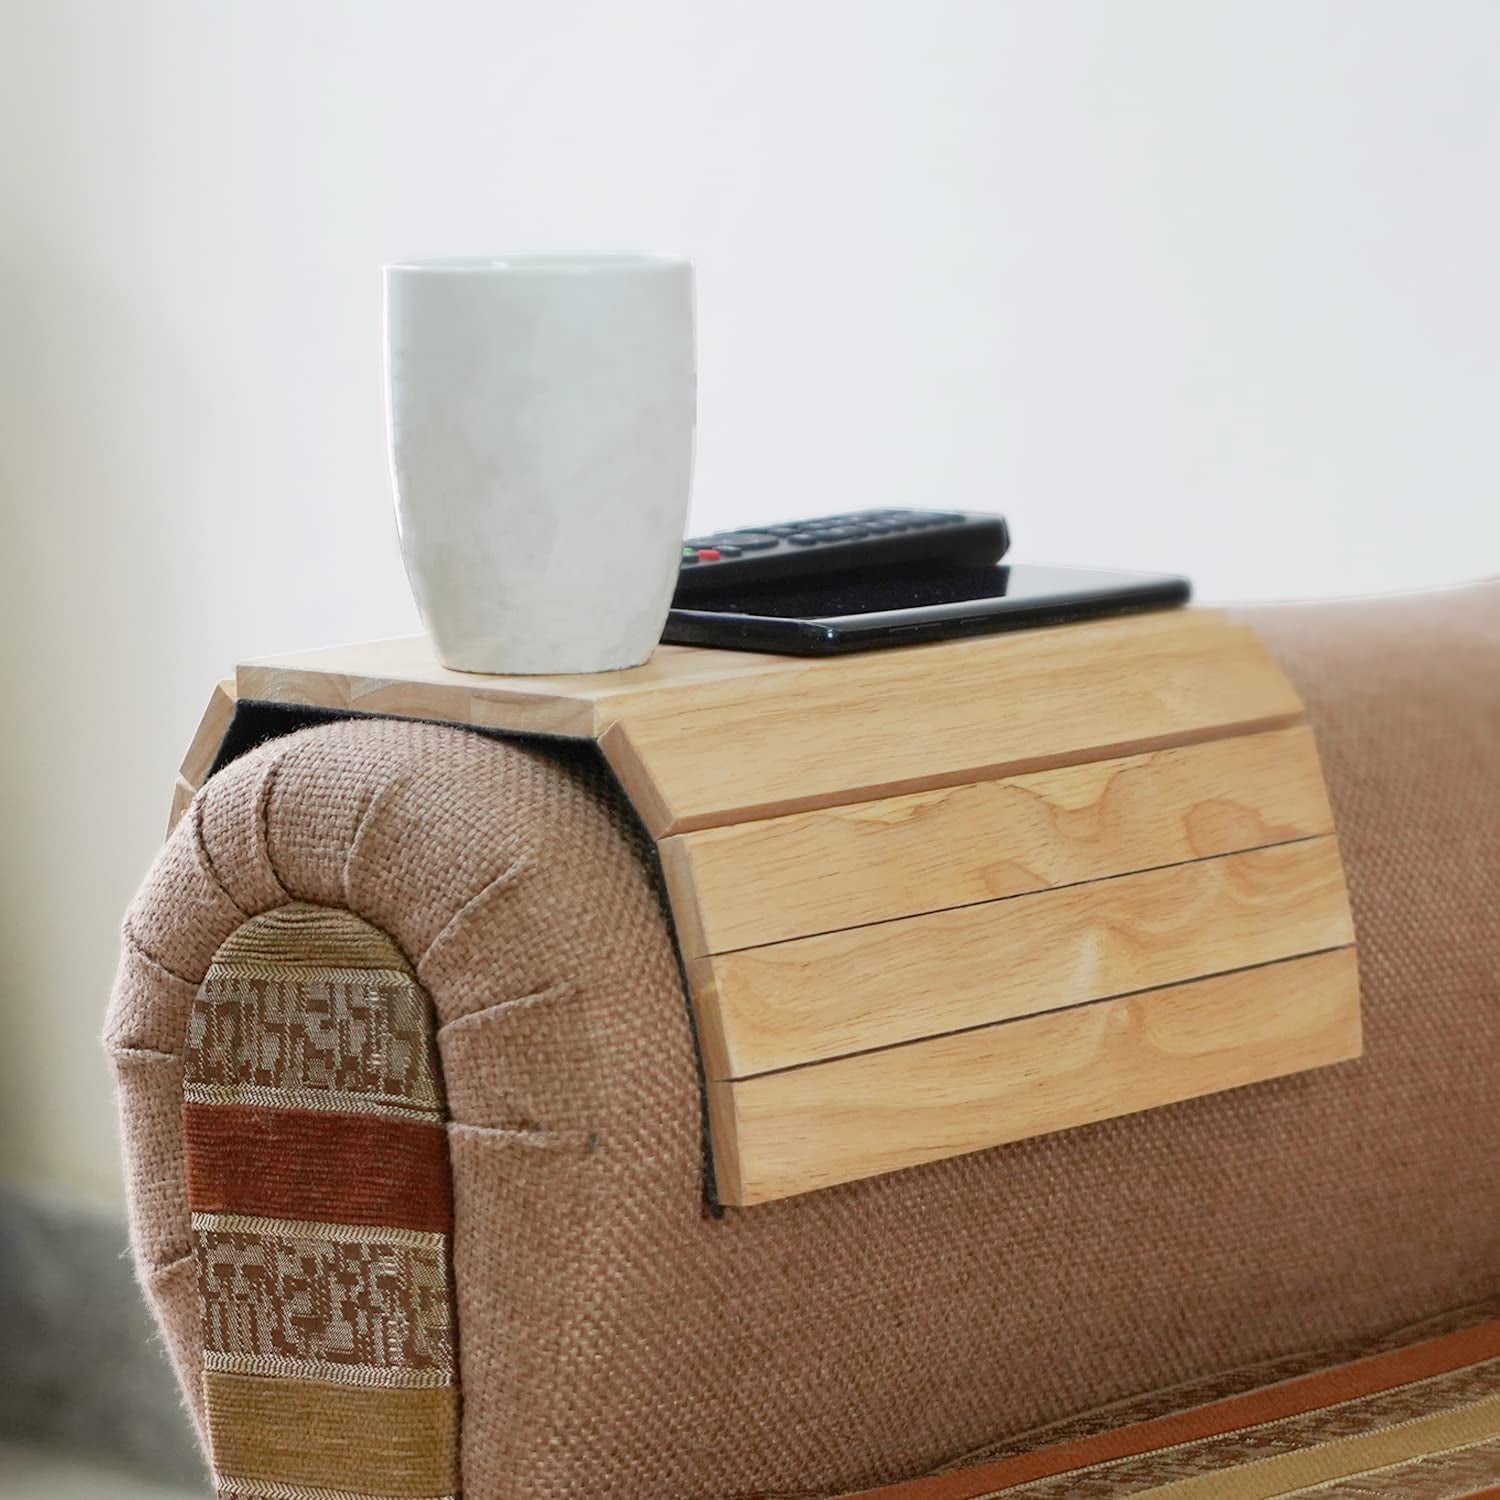 Sofa Arm Tray Foldable Wooden Armrest Tray Sofa Organiser for Drinks, Snack, Magazine, and Remote - Square Couch Protector Laptop and Tablet Holder